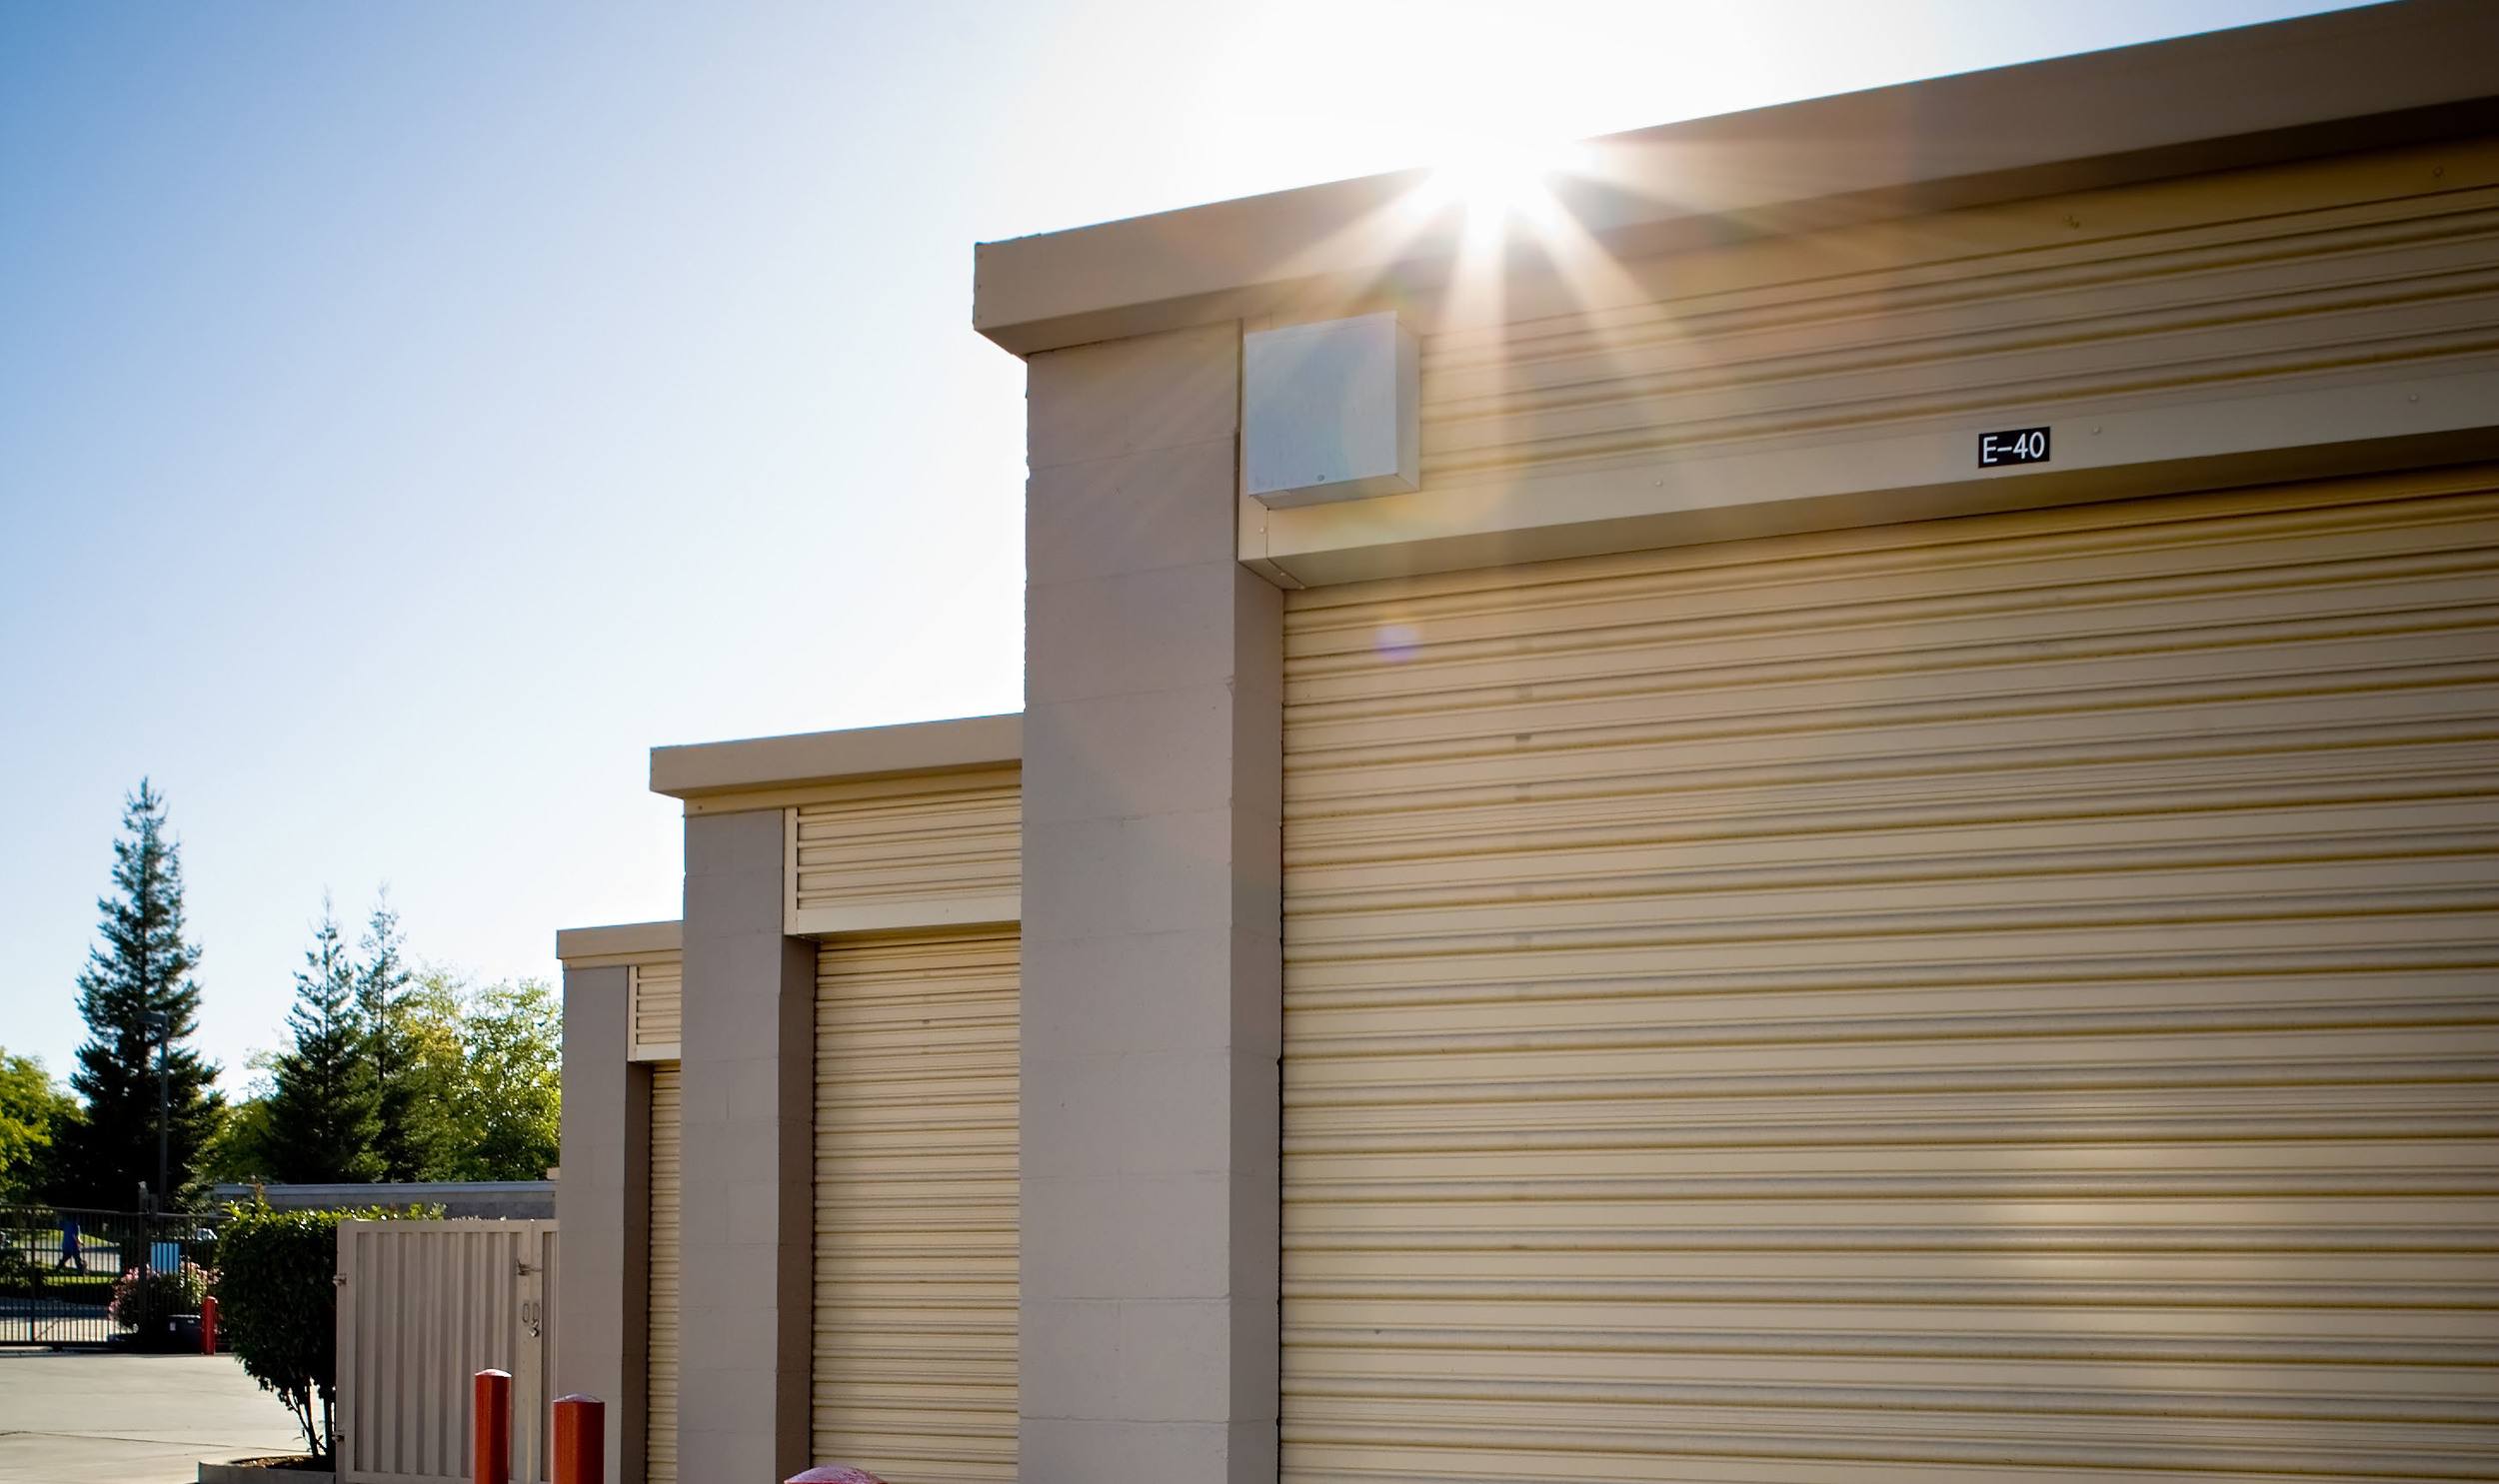 Easy access to our self storage units at Rock Creek Self Storage in Auburn, California